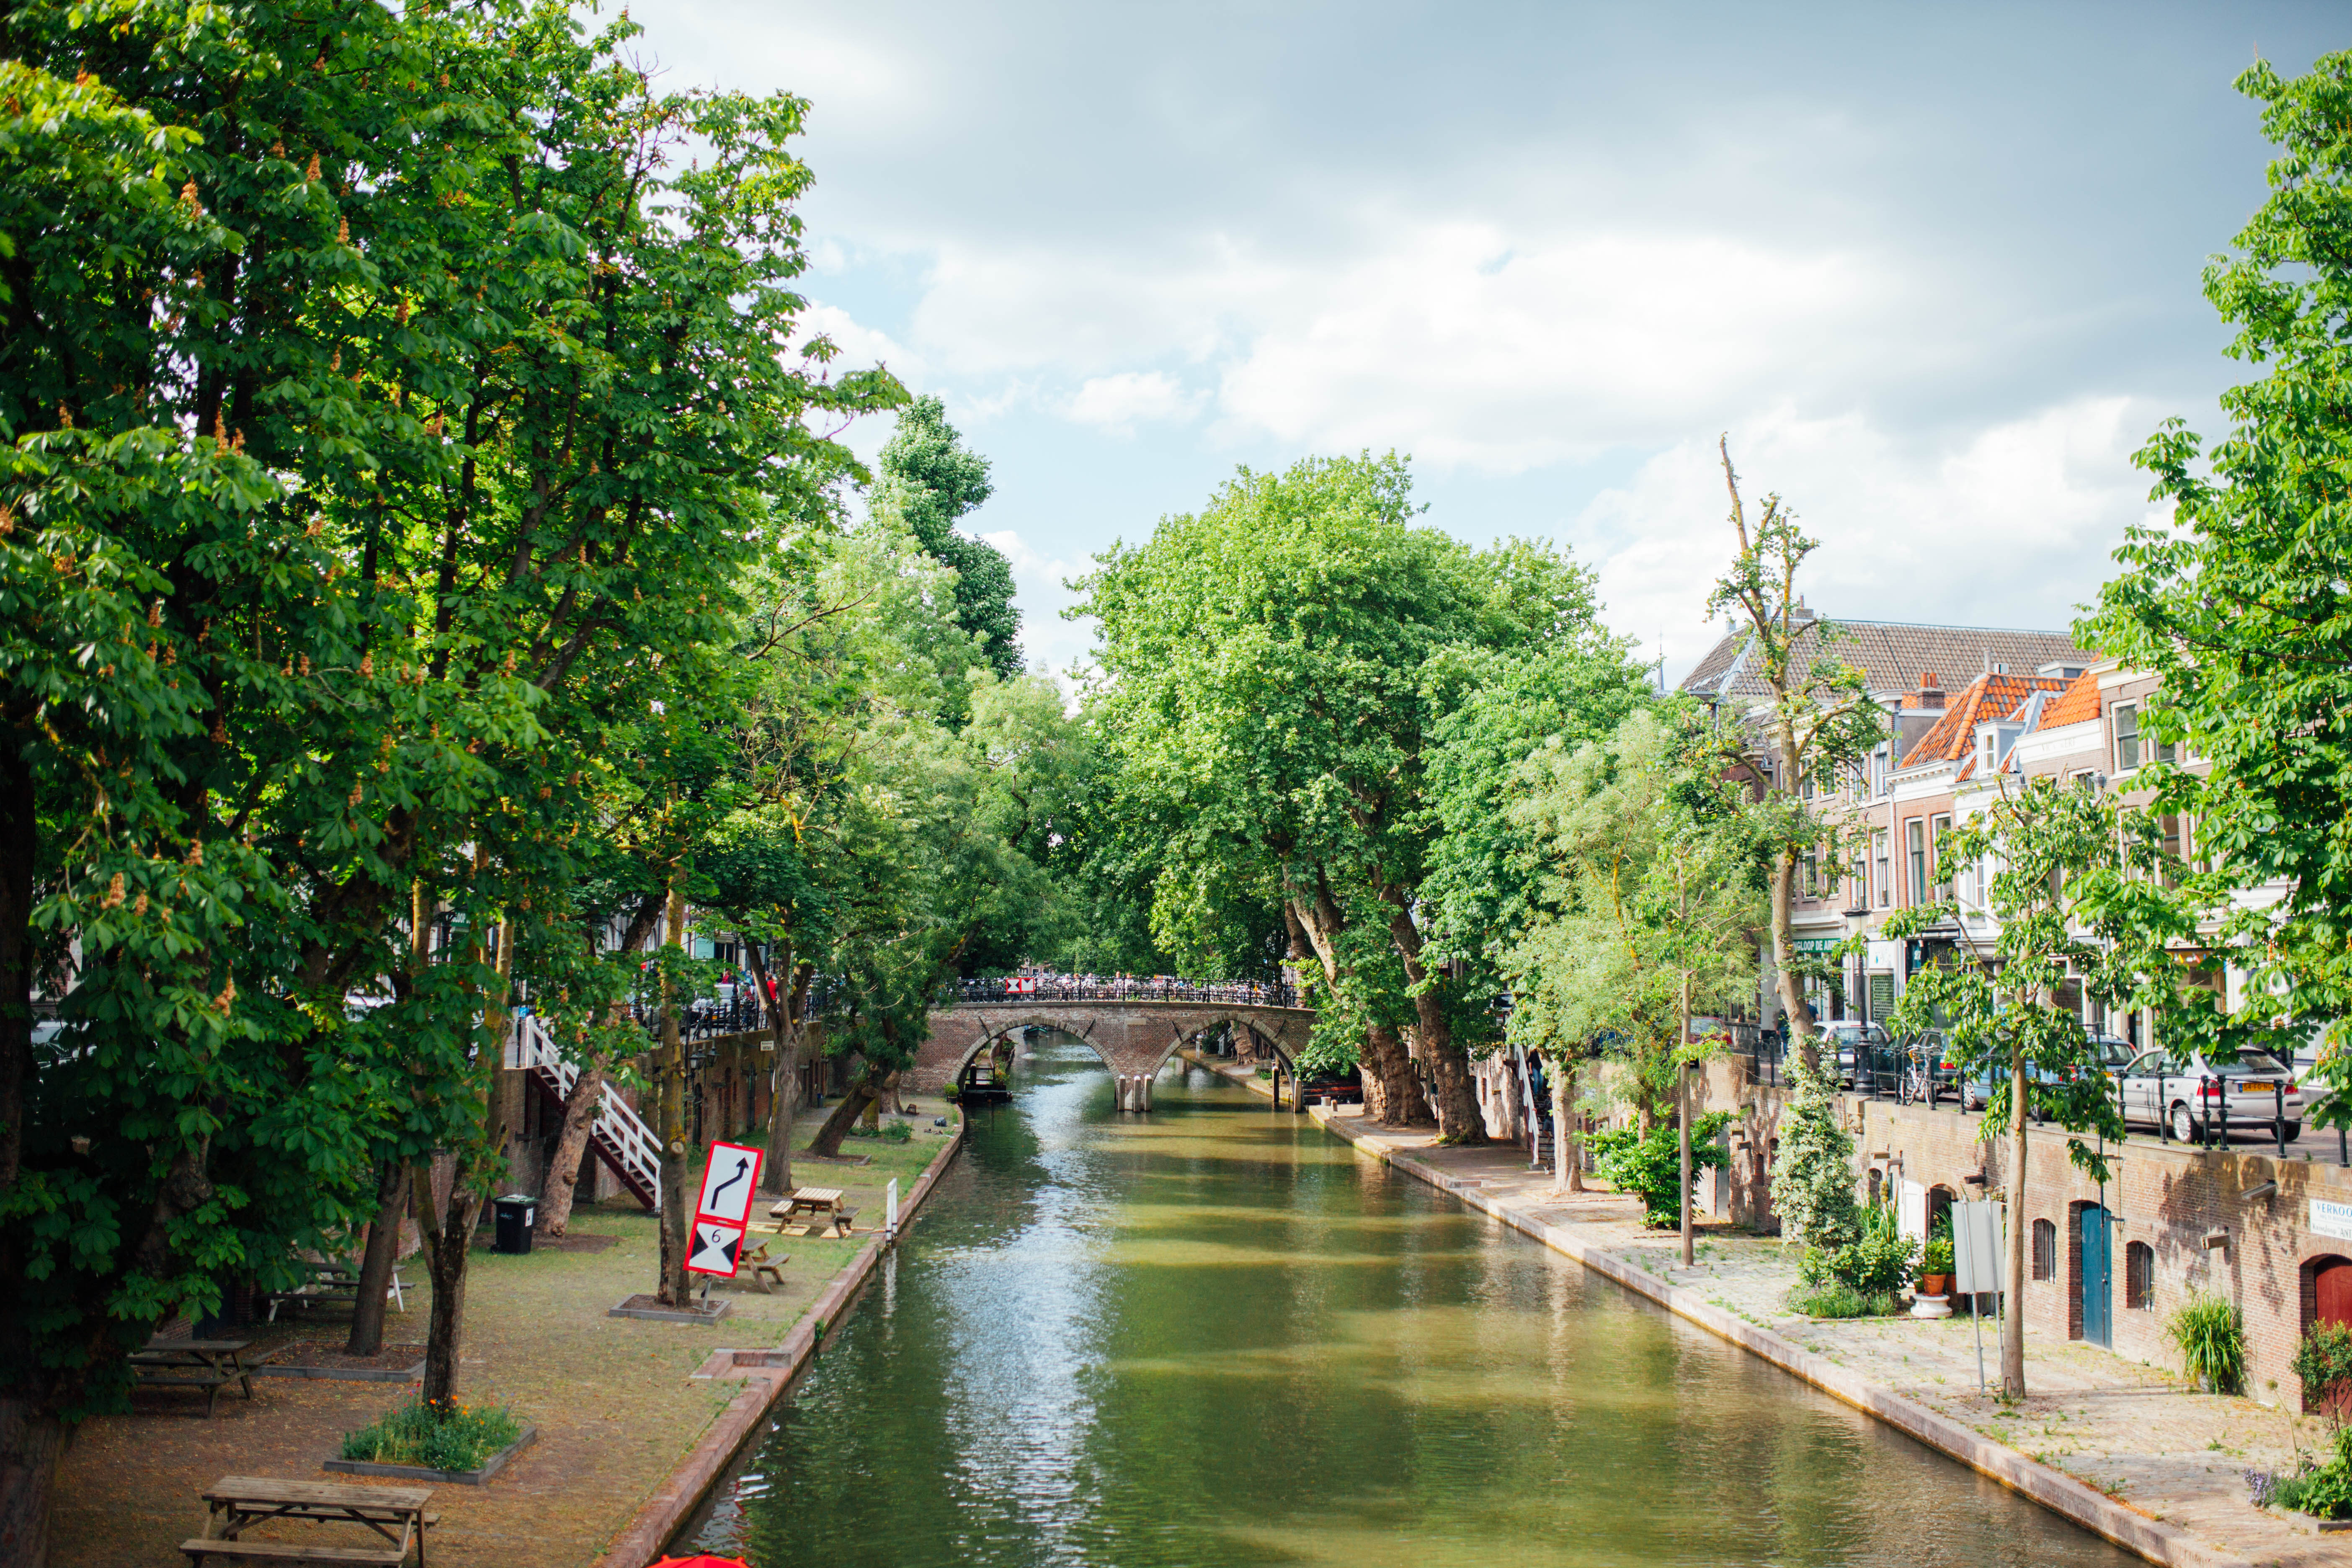 Exploring the Netherlands, day 01: Including walking around the canals, discovering new favorite local shops, and finding the best cup of coffee | bygabriella.co